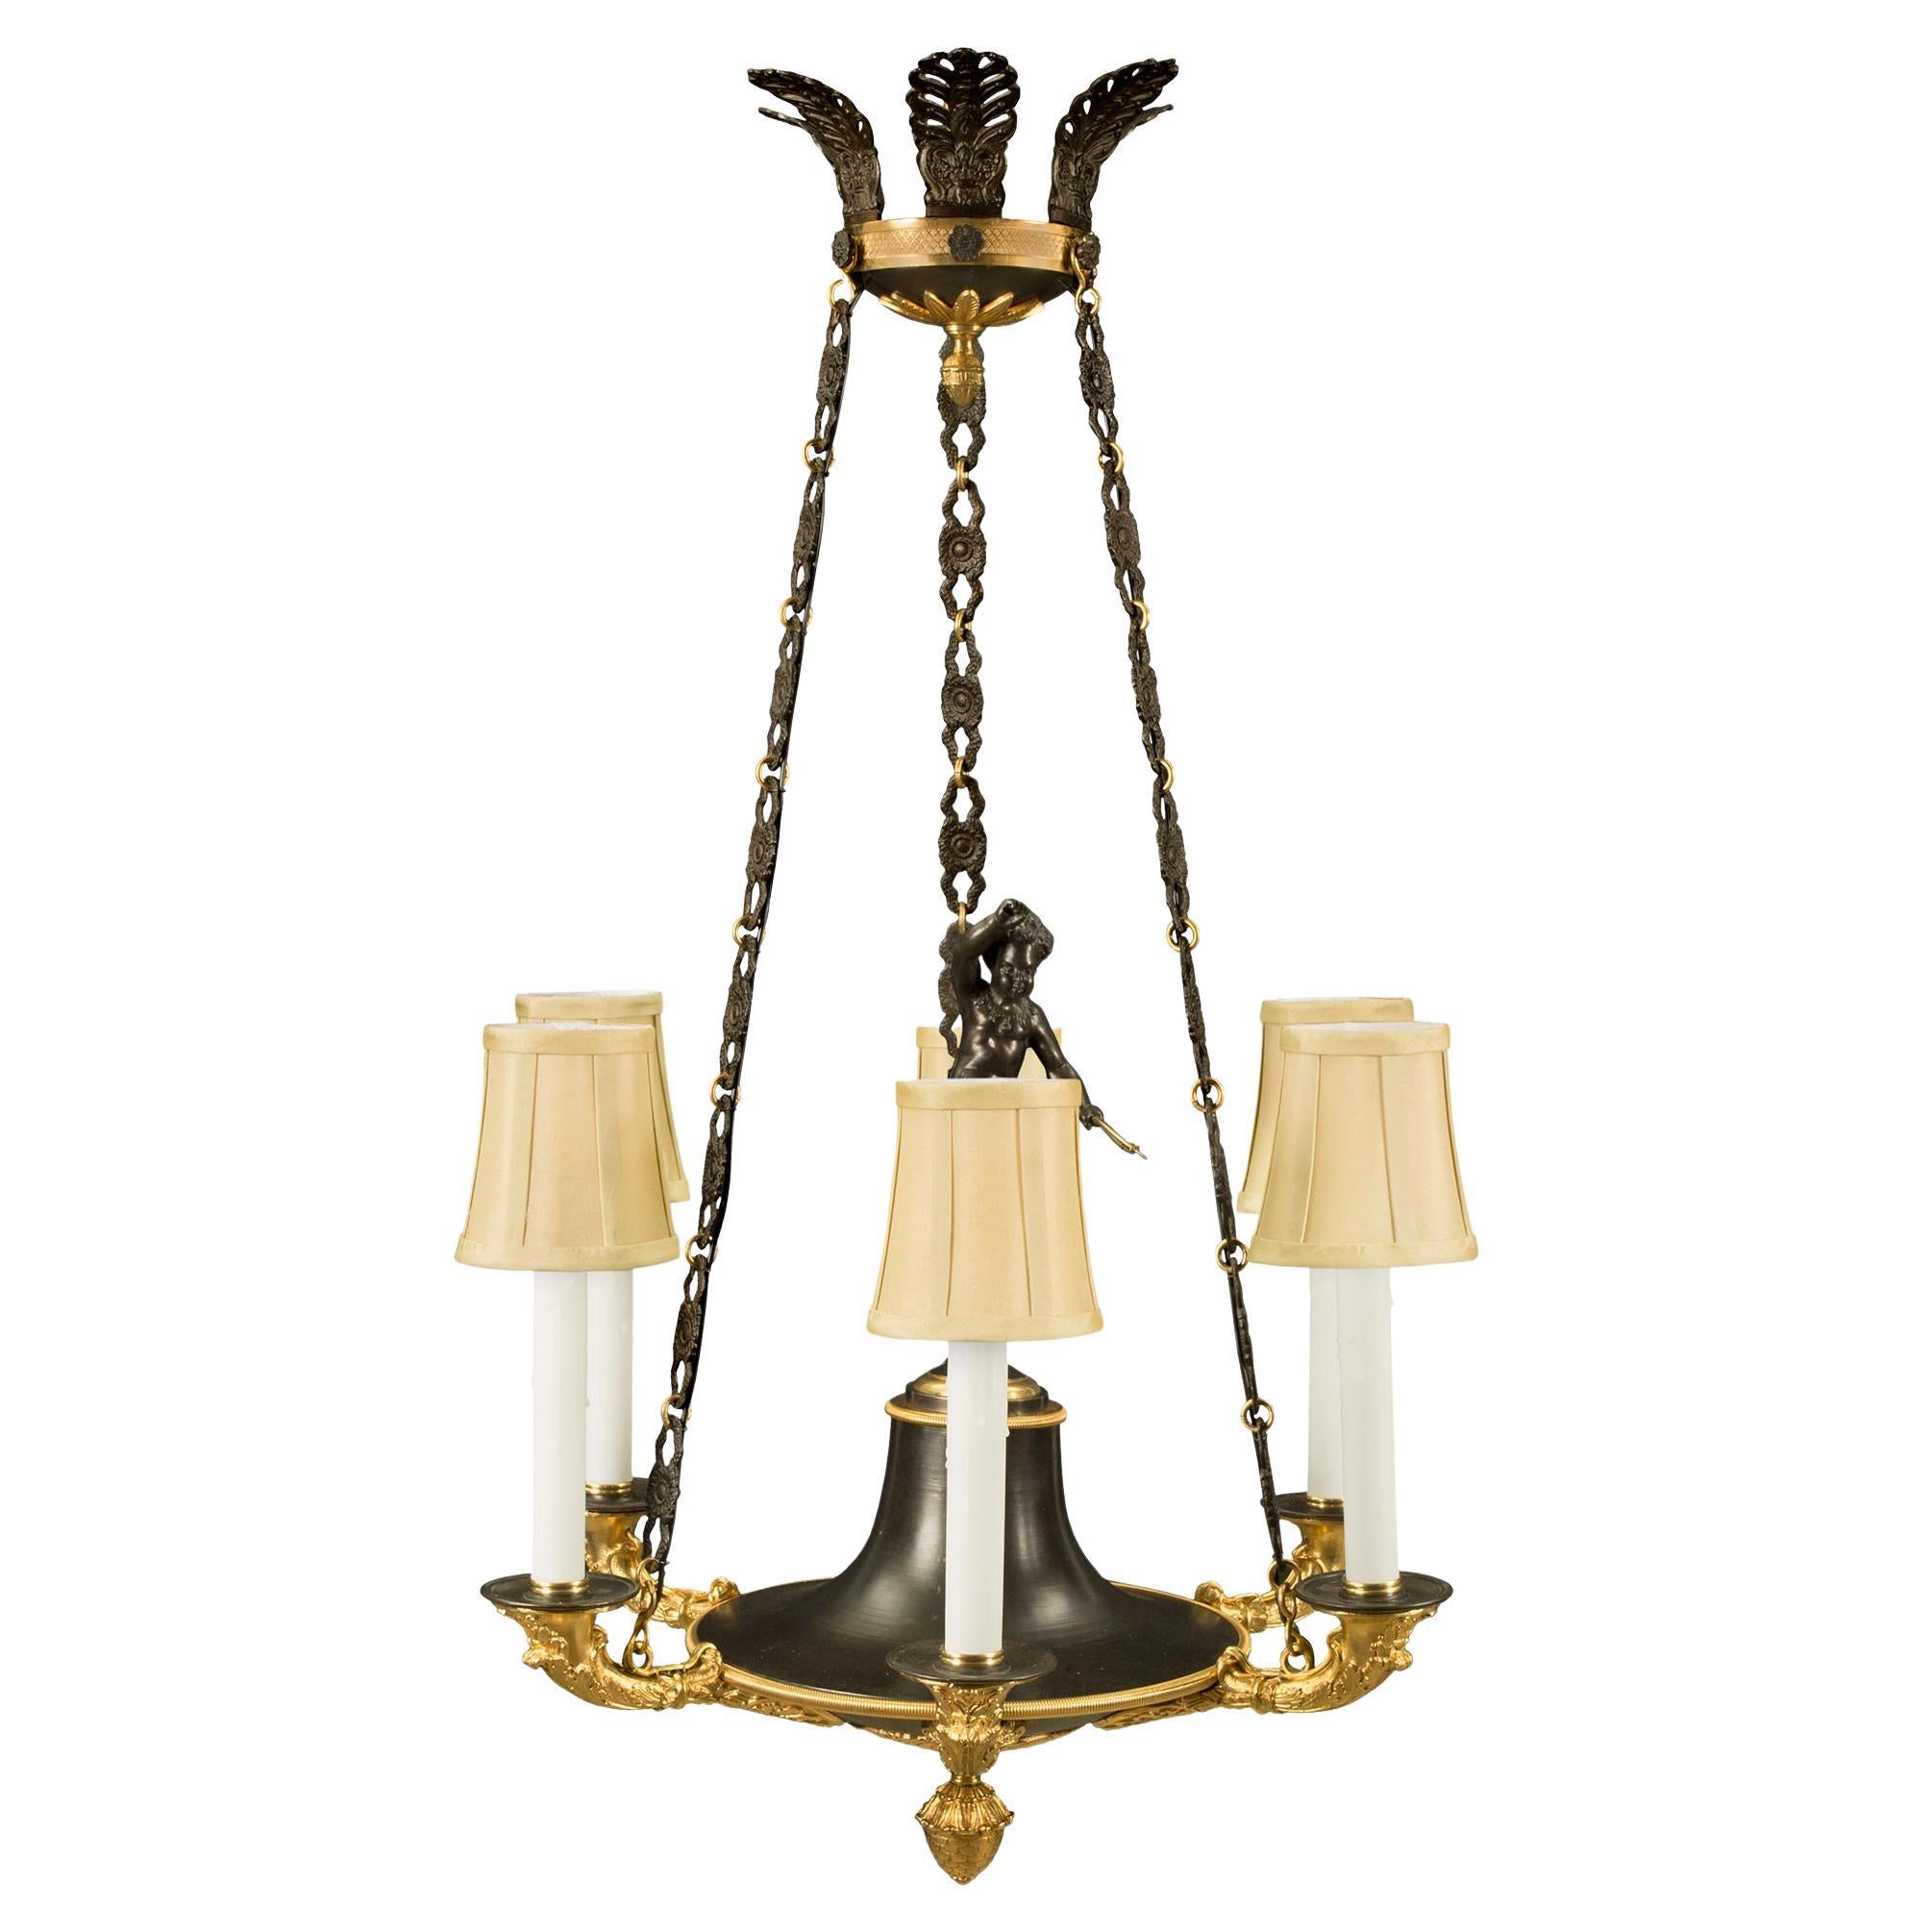 French 19th Century Neoclassical Style Bronze and Ormolu Chandelier For Sale